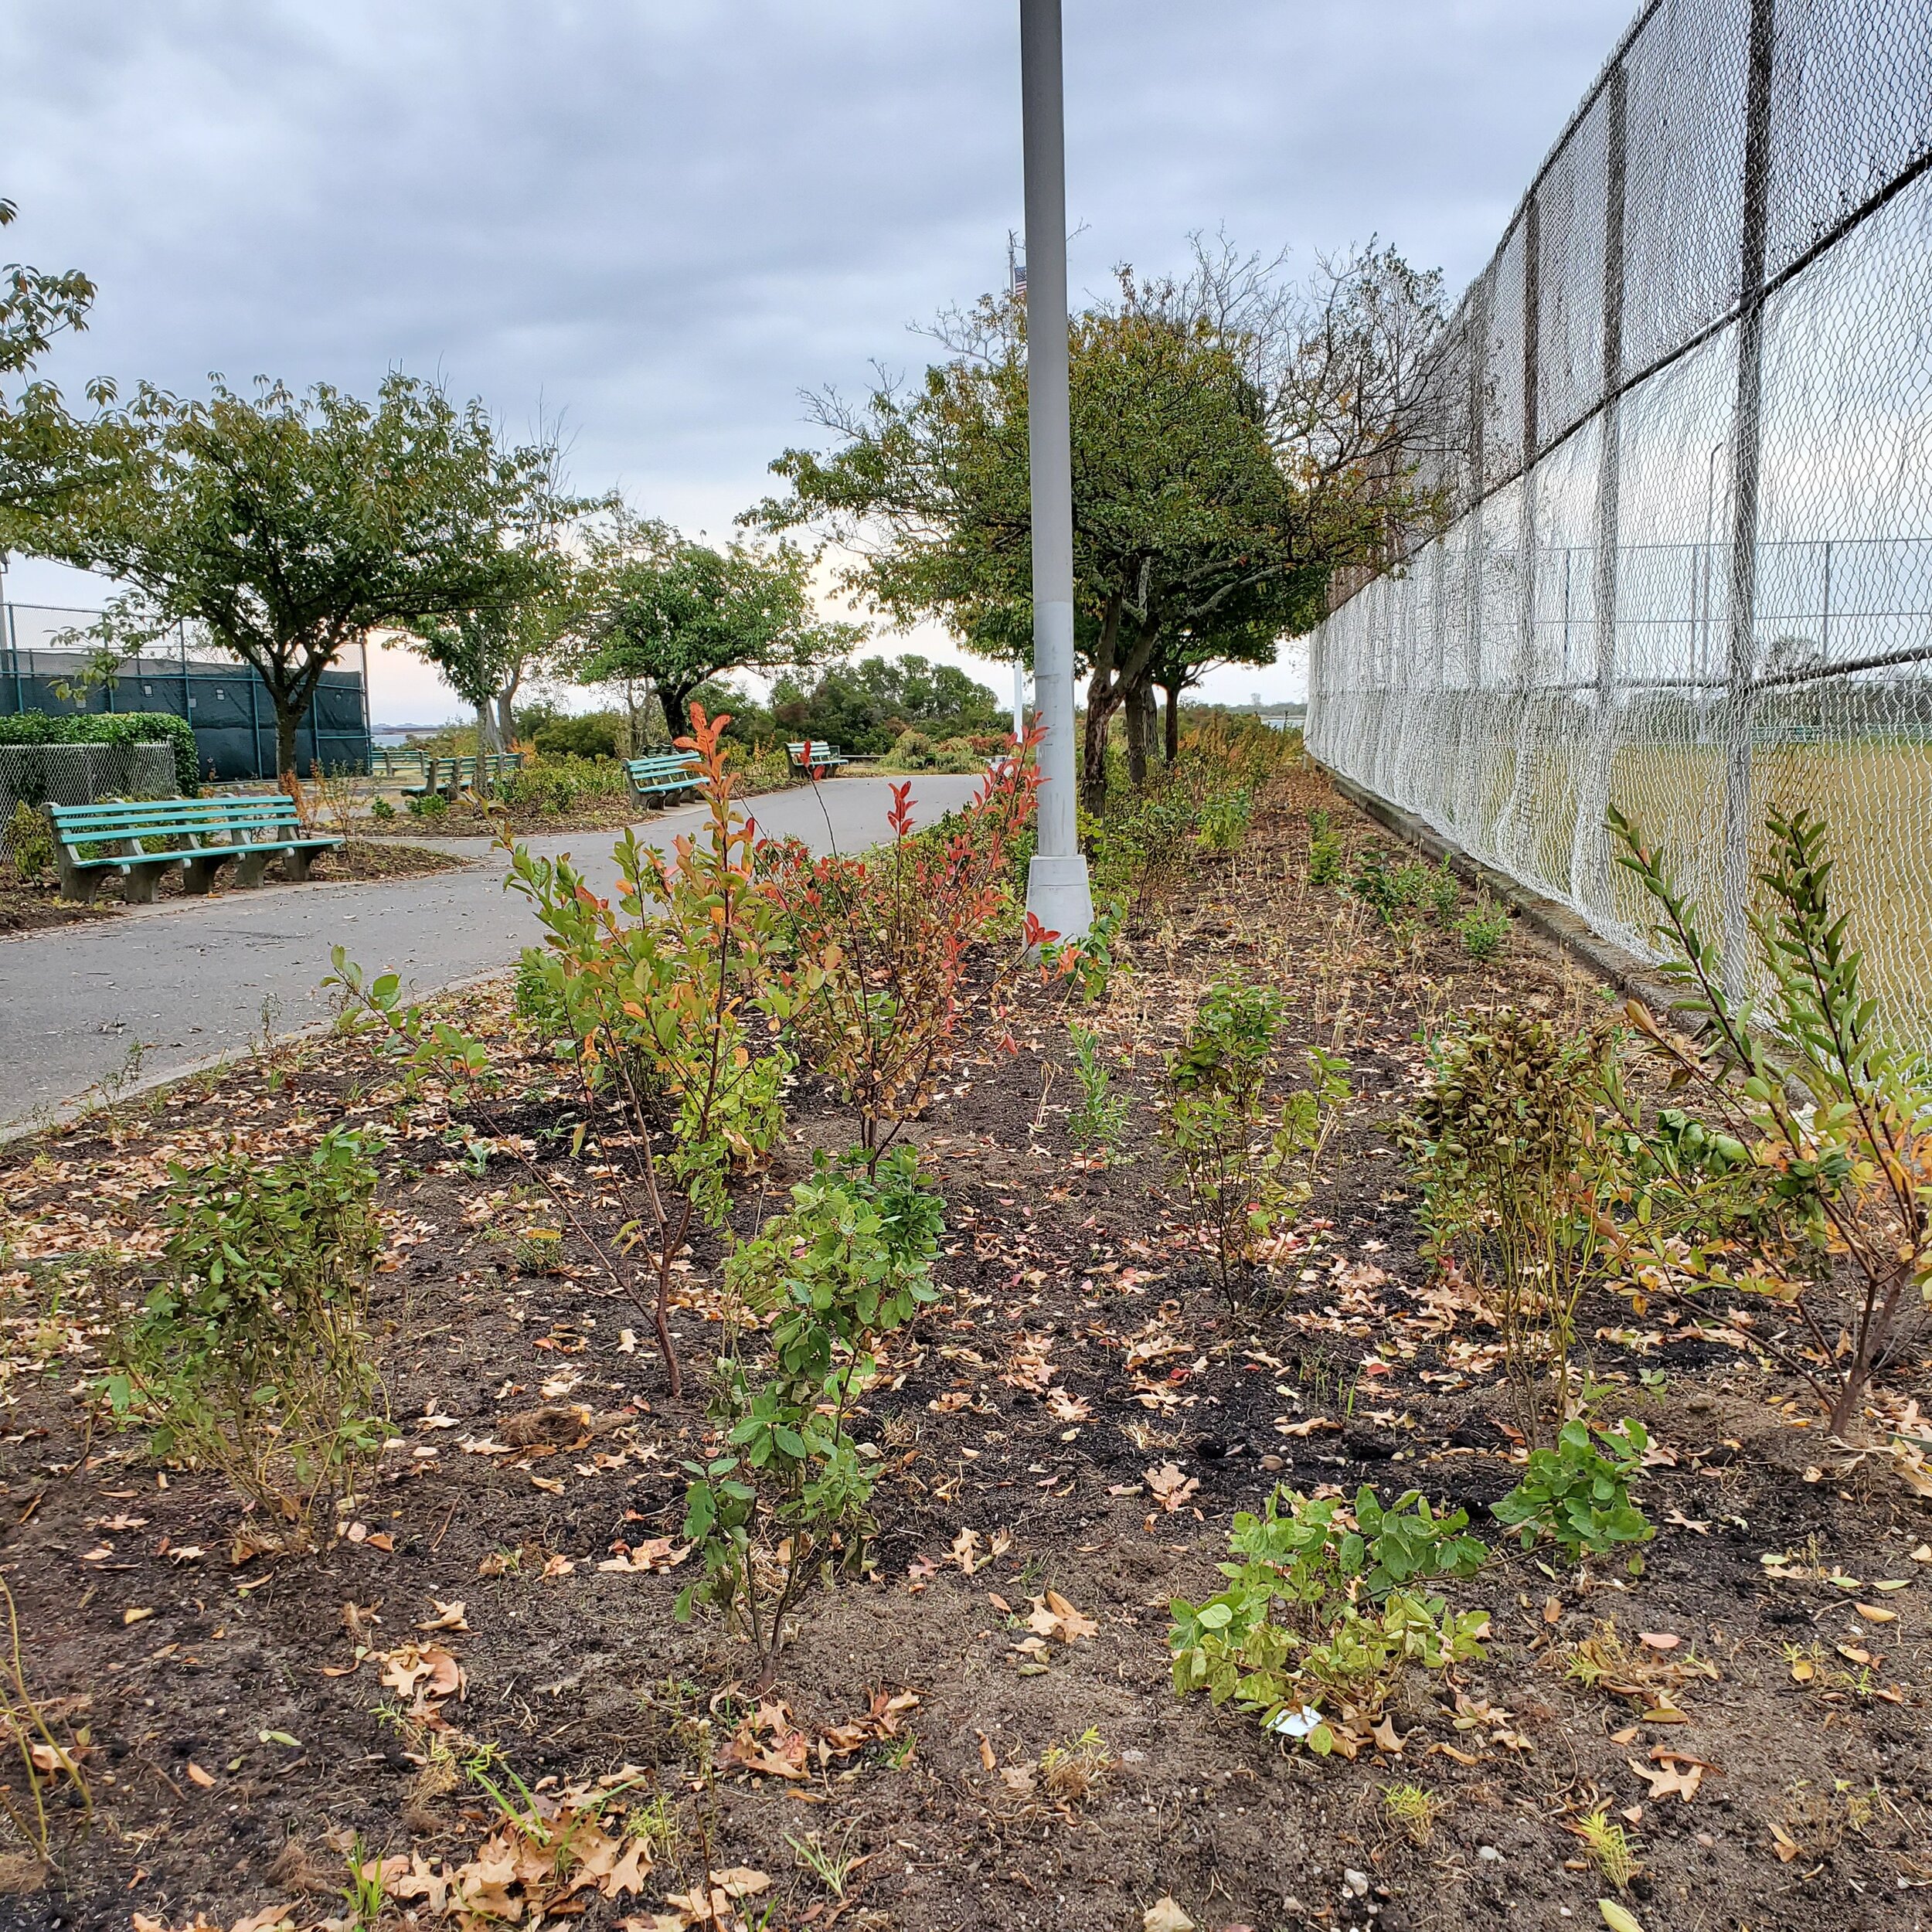 Native shrubs and perennials along the central pathway